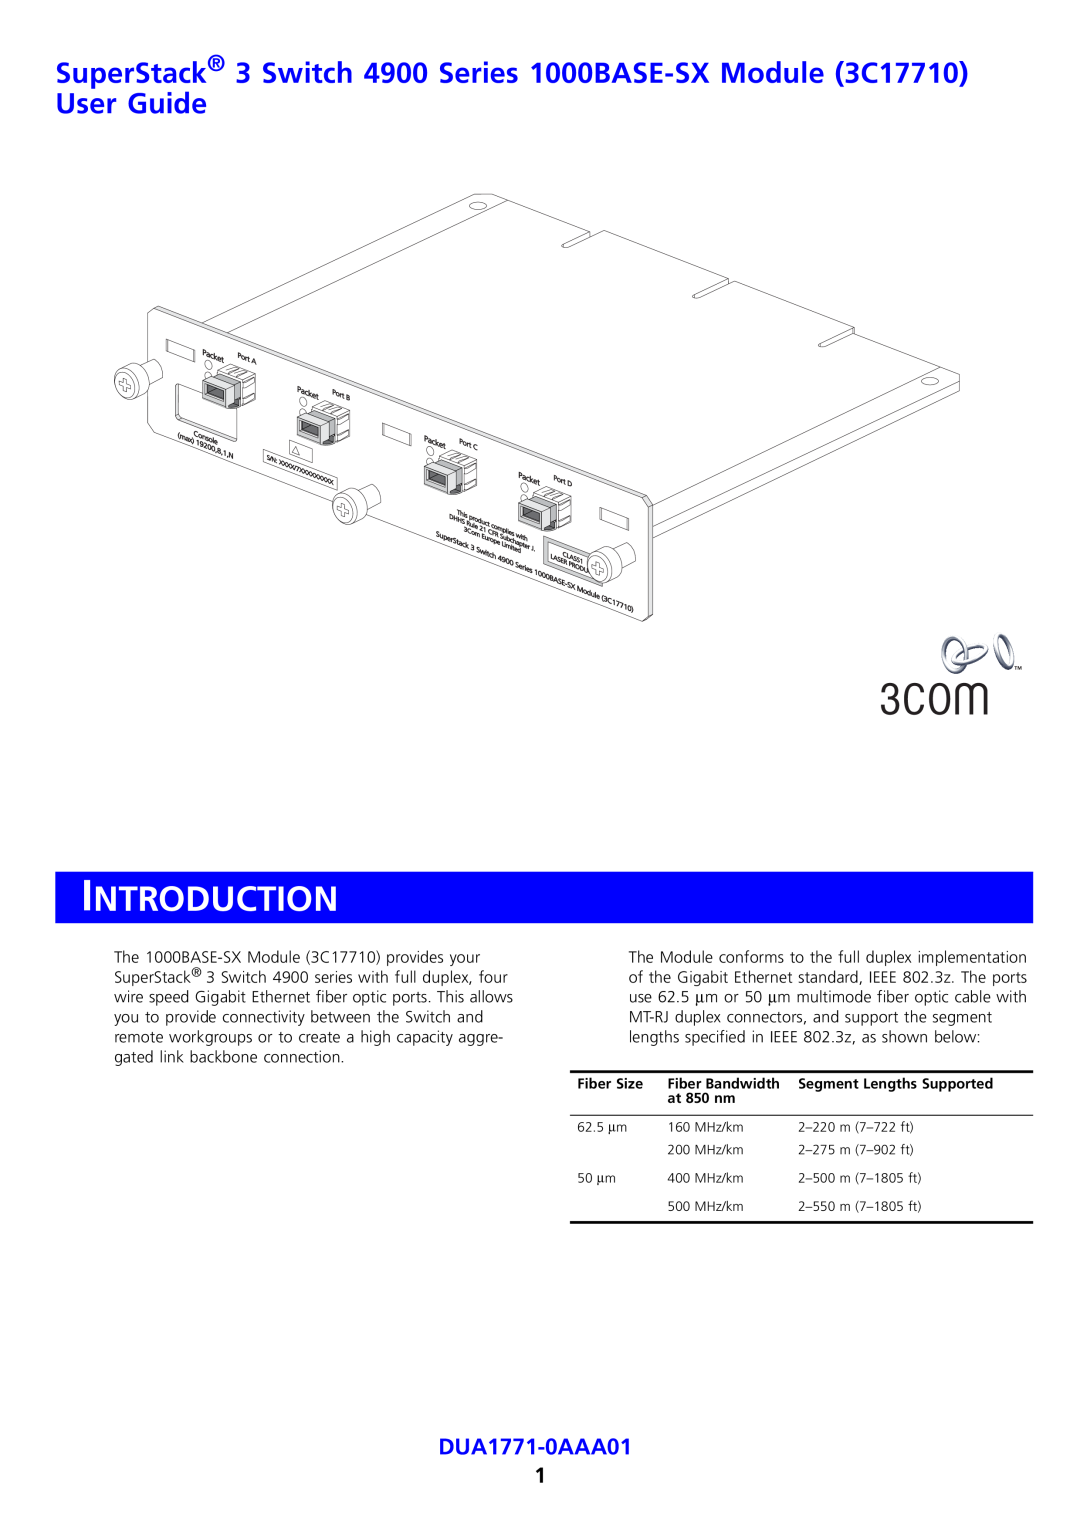 3Com DUA1771-0AAA01 manual Introduction, SuperStack 3 Switch 4900 Series 1000BASE-SX Module 3C17710 User Guide 